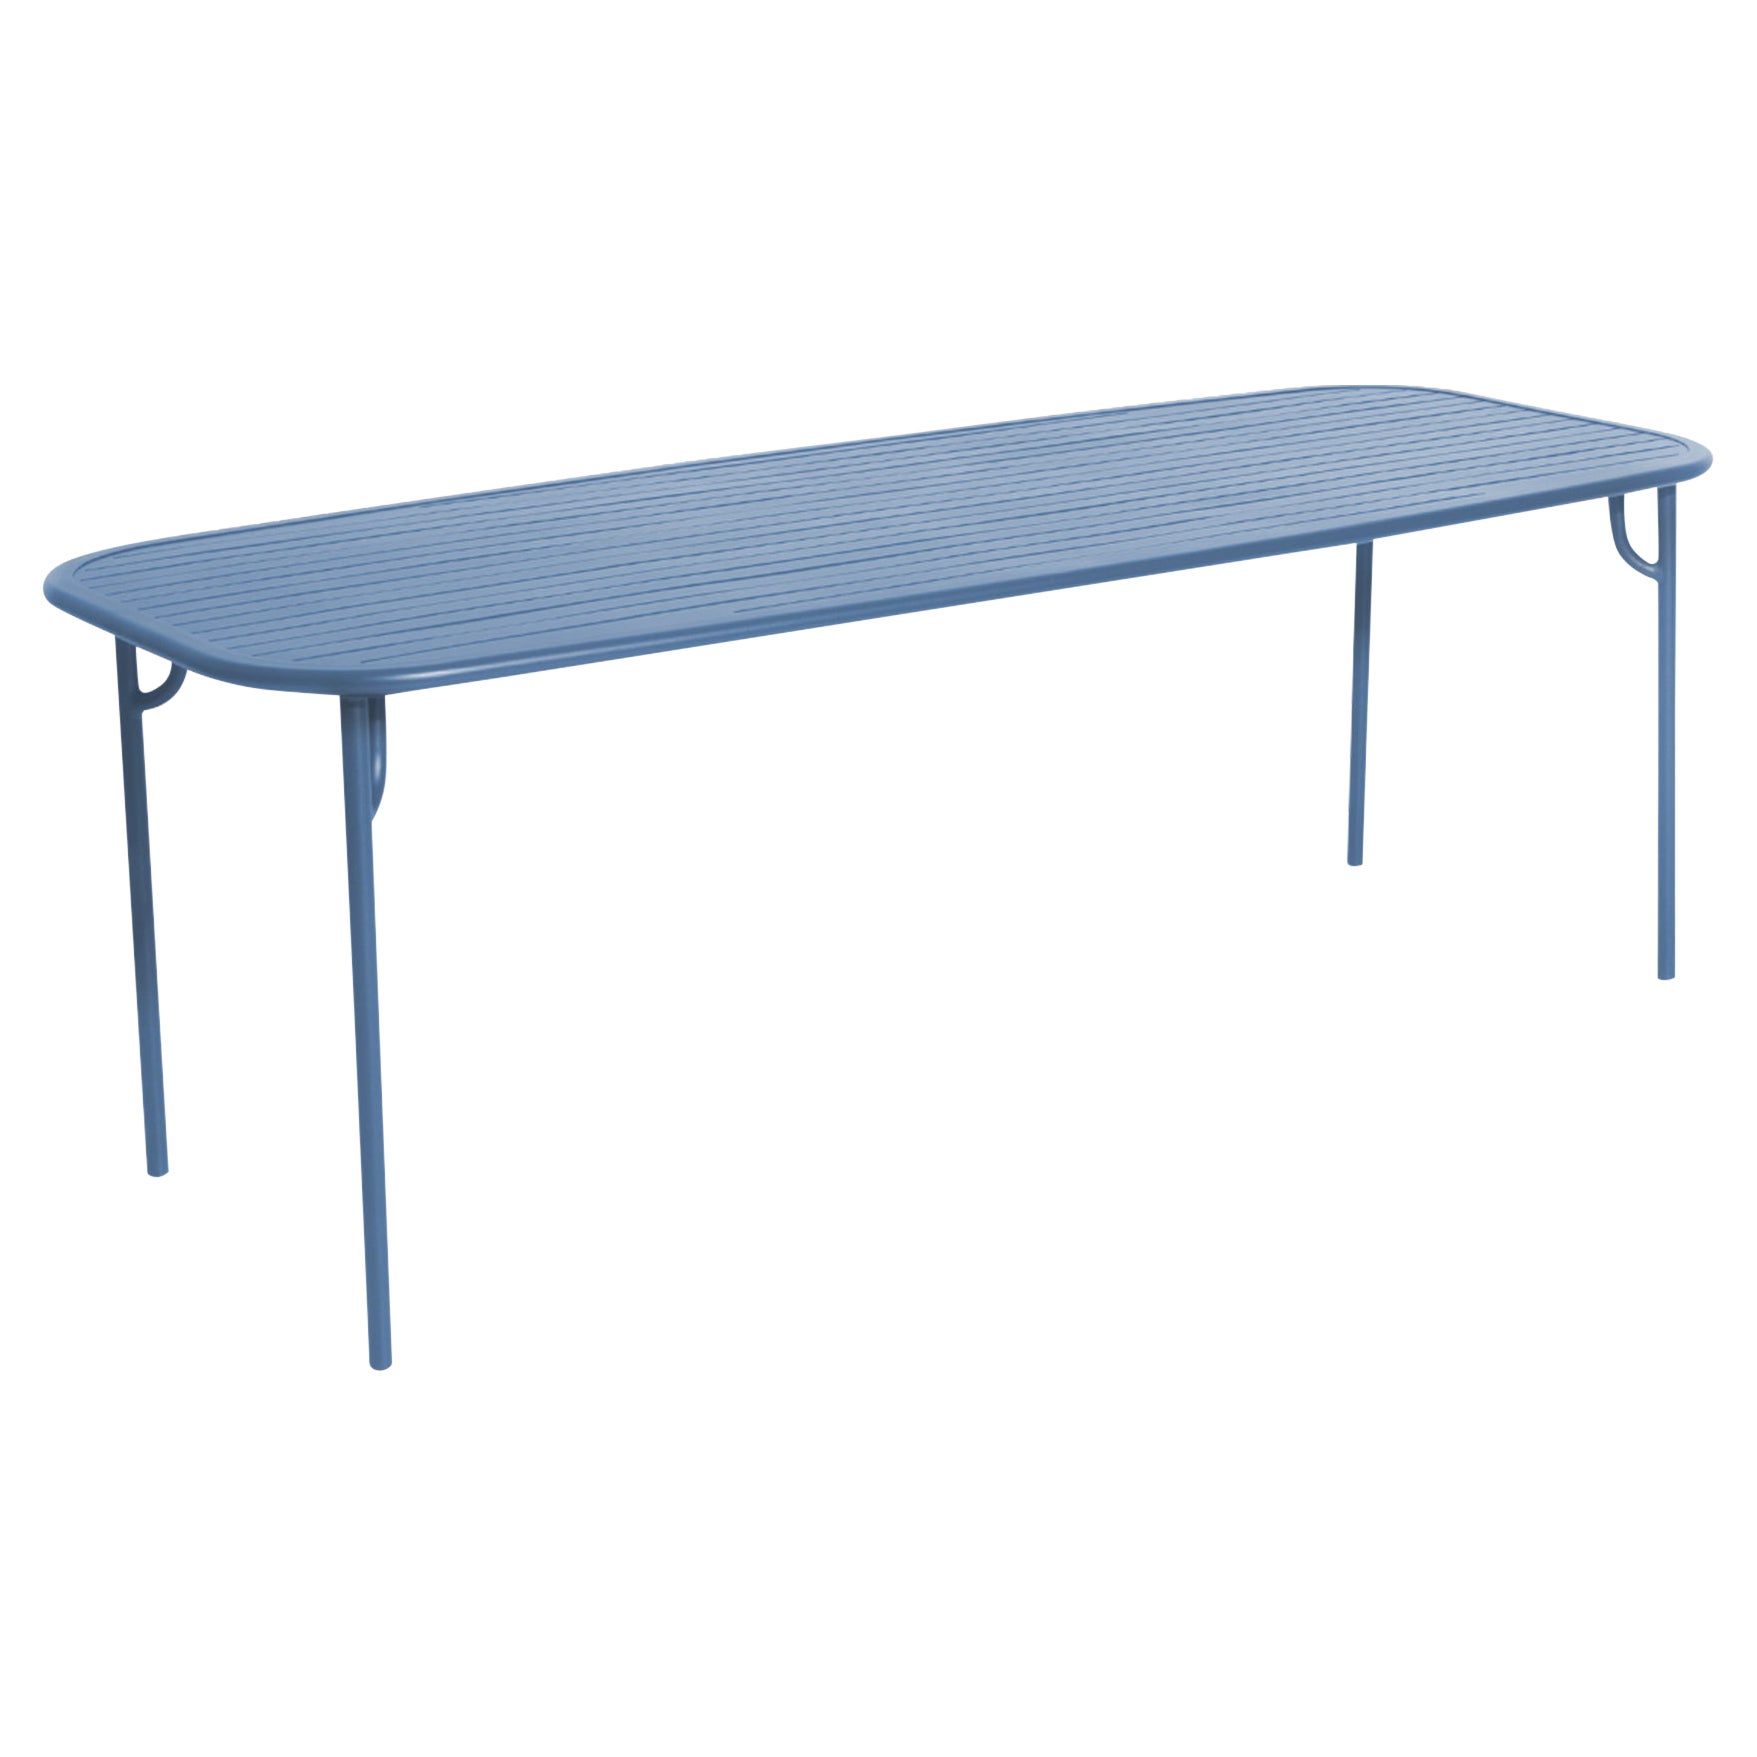 Petite Friture Week-End Large Rectangular Dining Table in Azur Blue with Slats